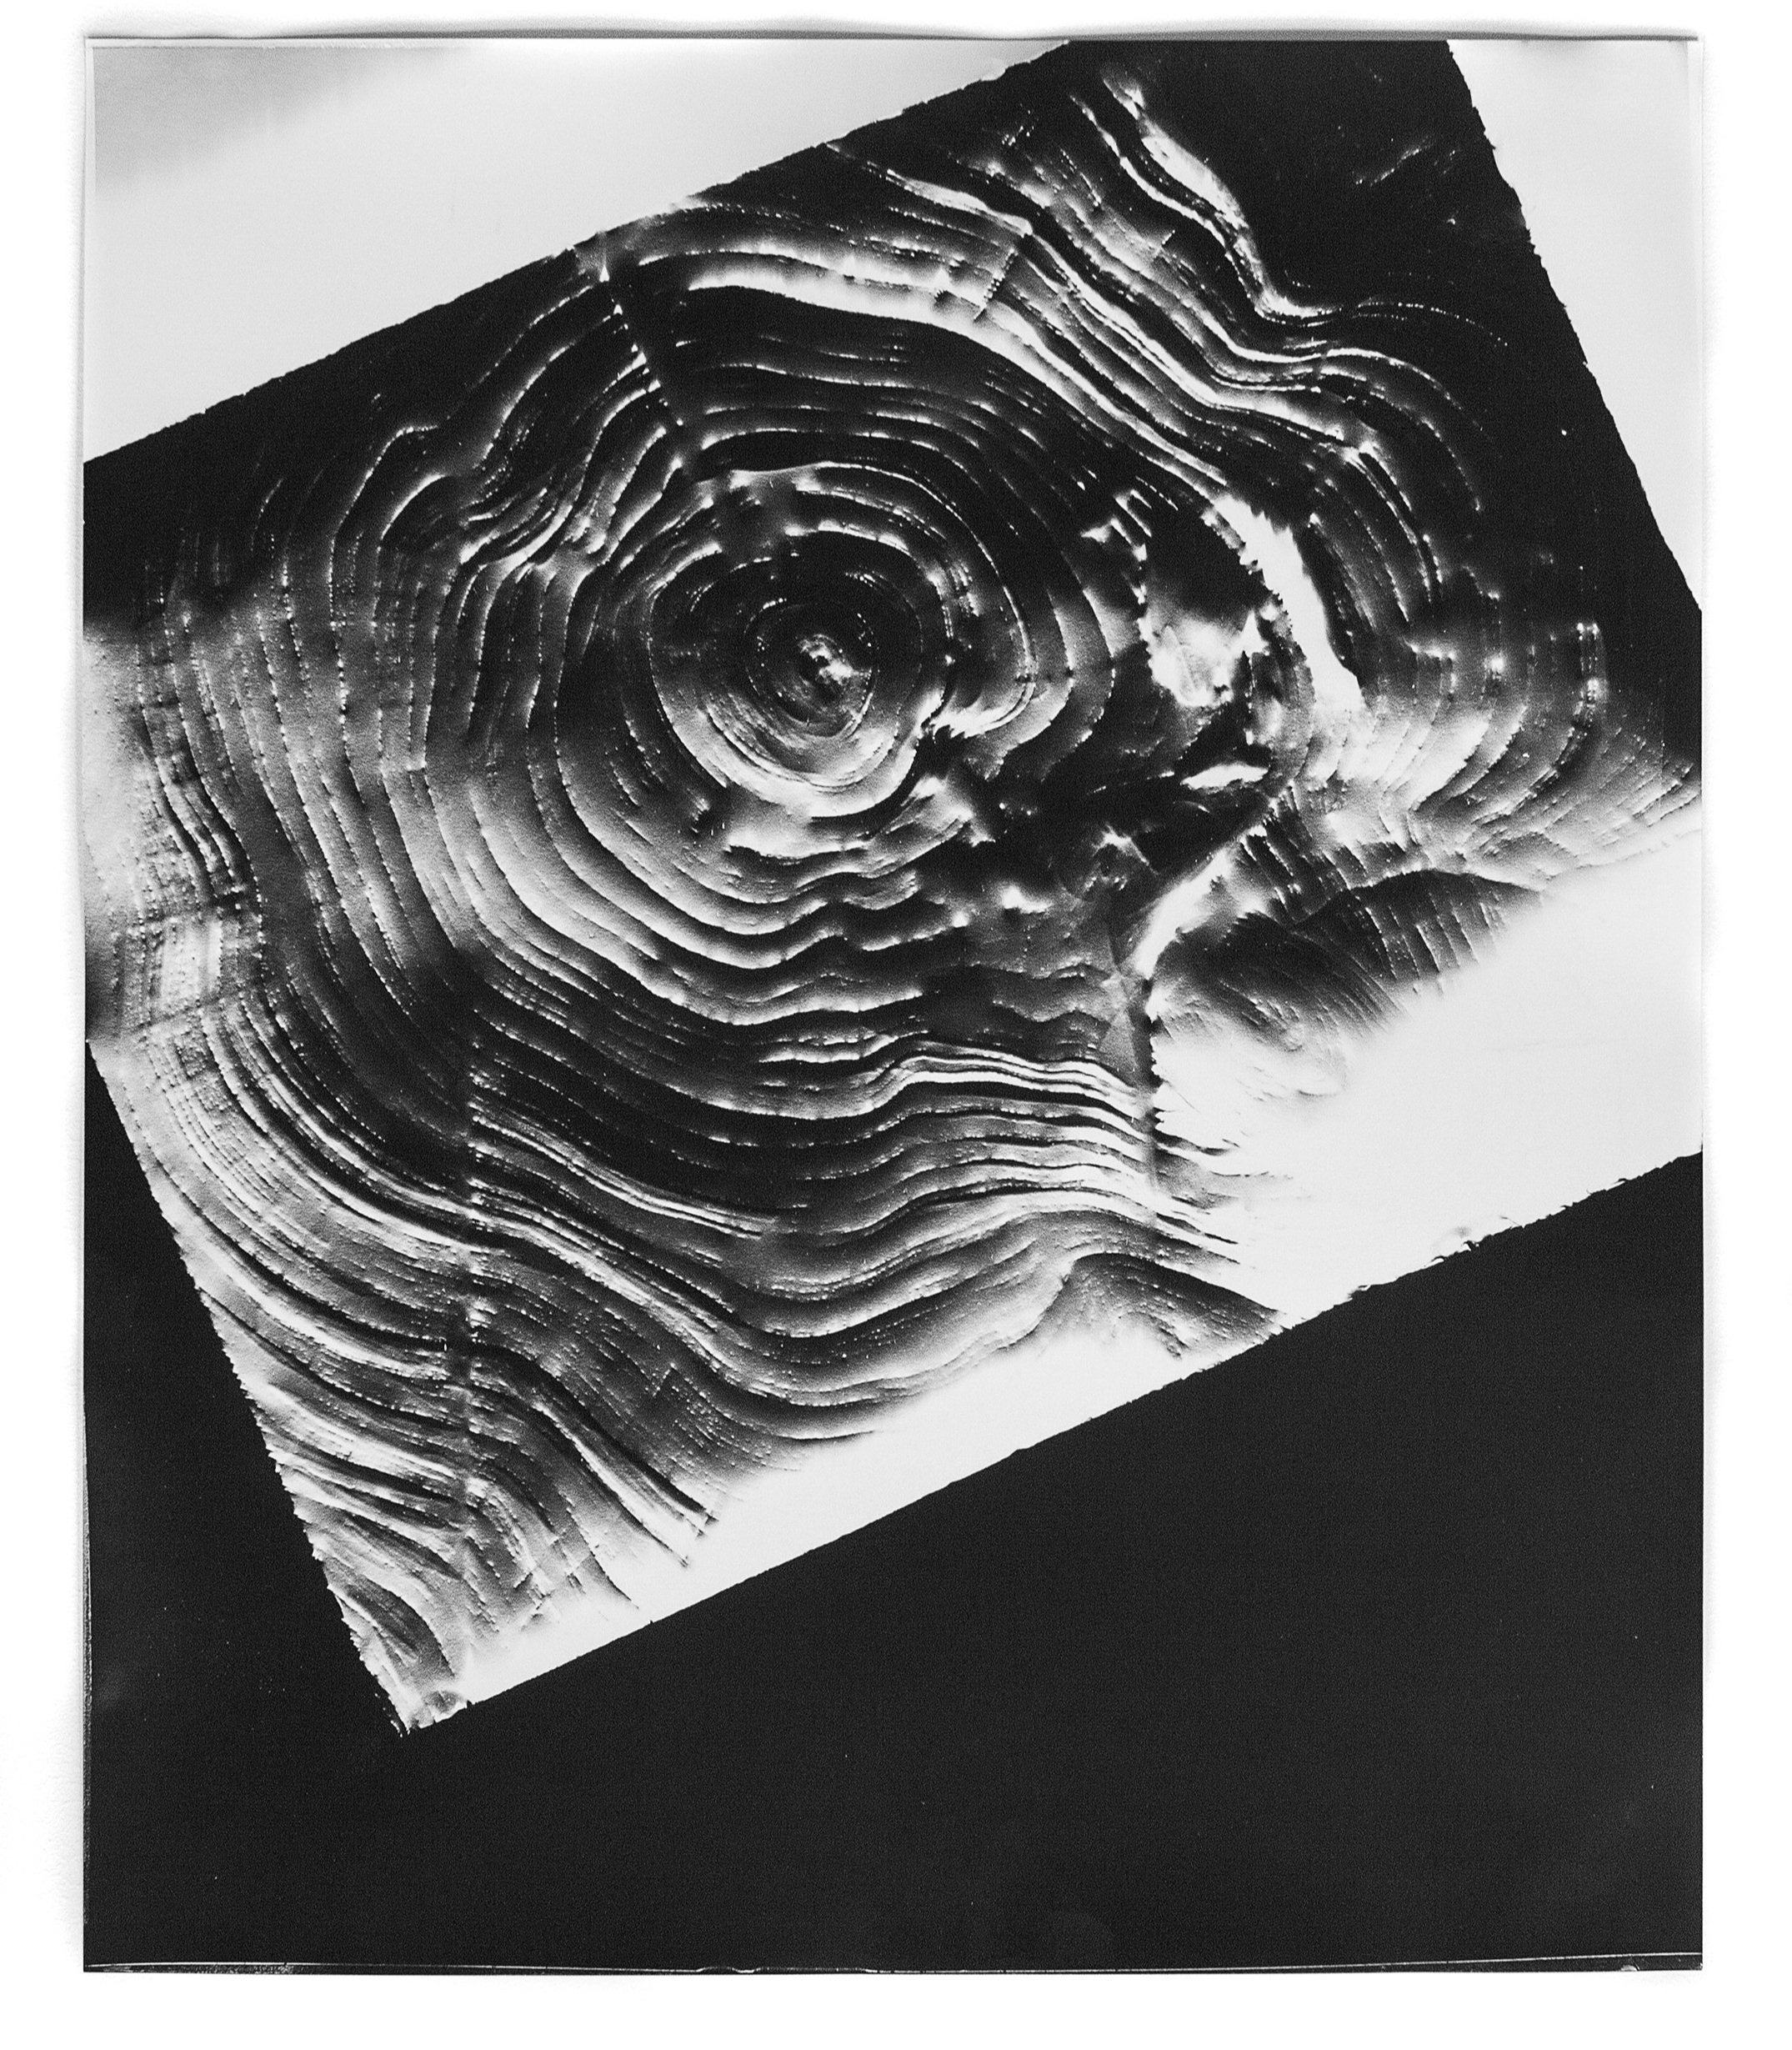   Automatic Earth 48,  2017 Photographic rubbing (embossed silver gelatin photogram) 24 x 20 in 